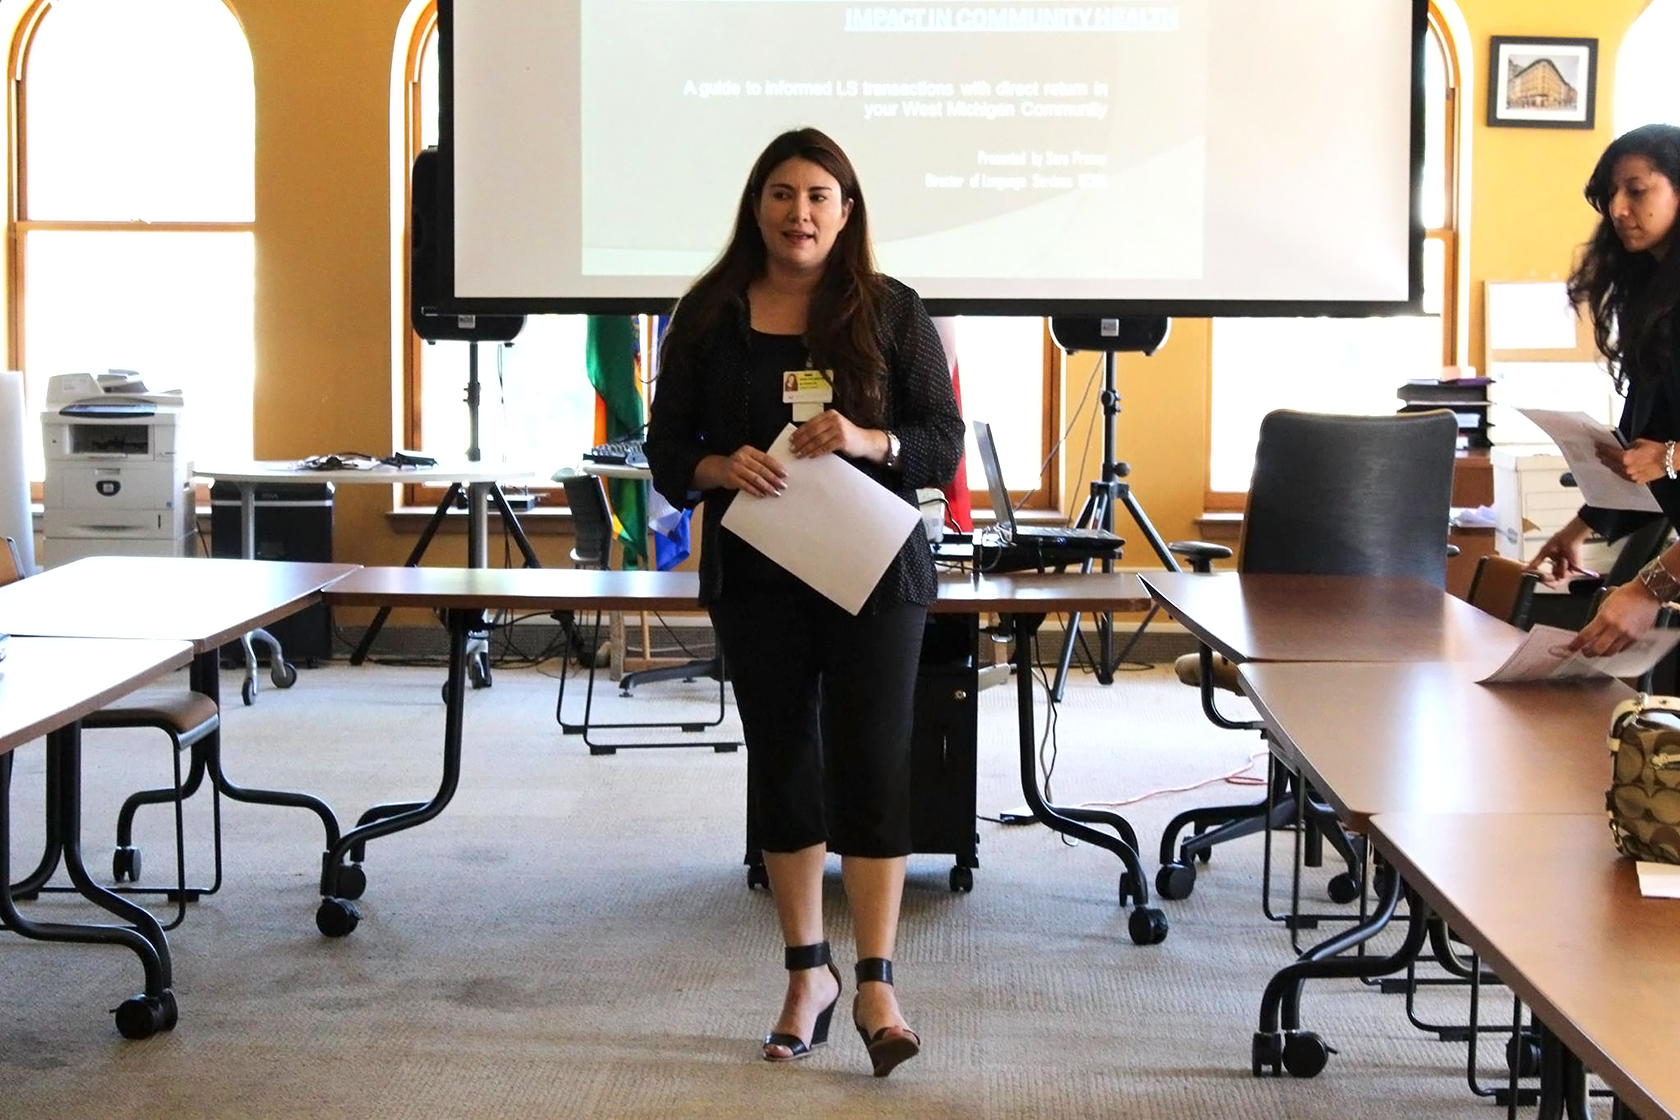 Former Language Services Director Sara Proano stands in front of a projector and in the center of several rectangular tables for workshop participants forming a square around her while holding a document.